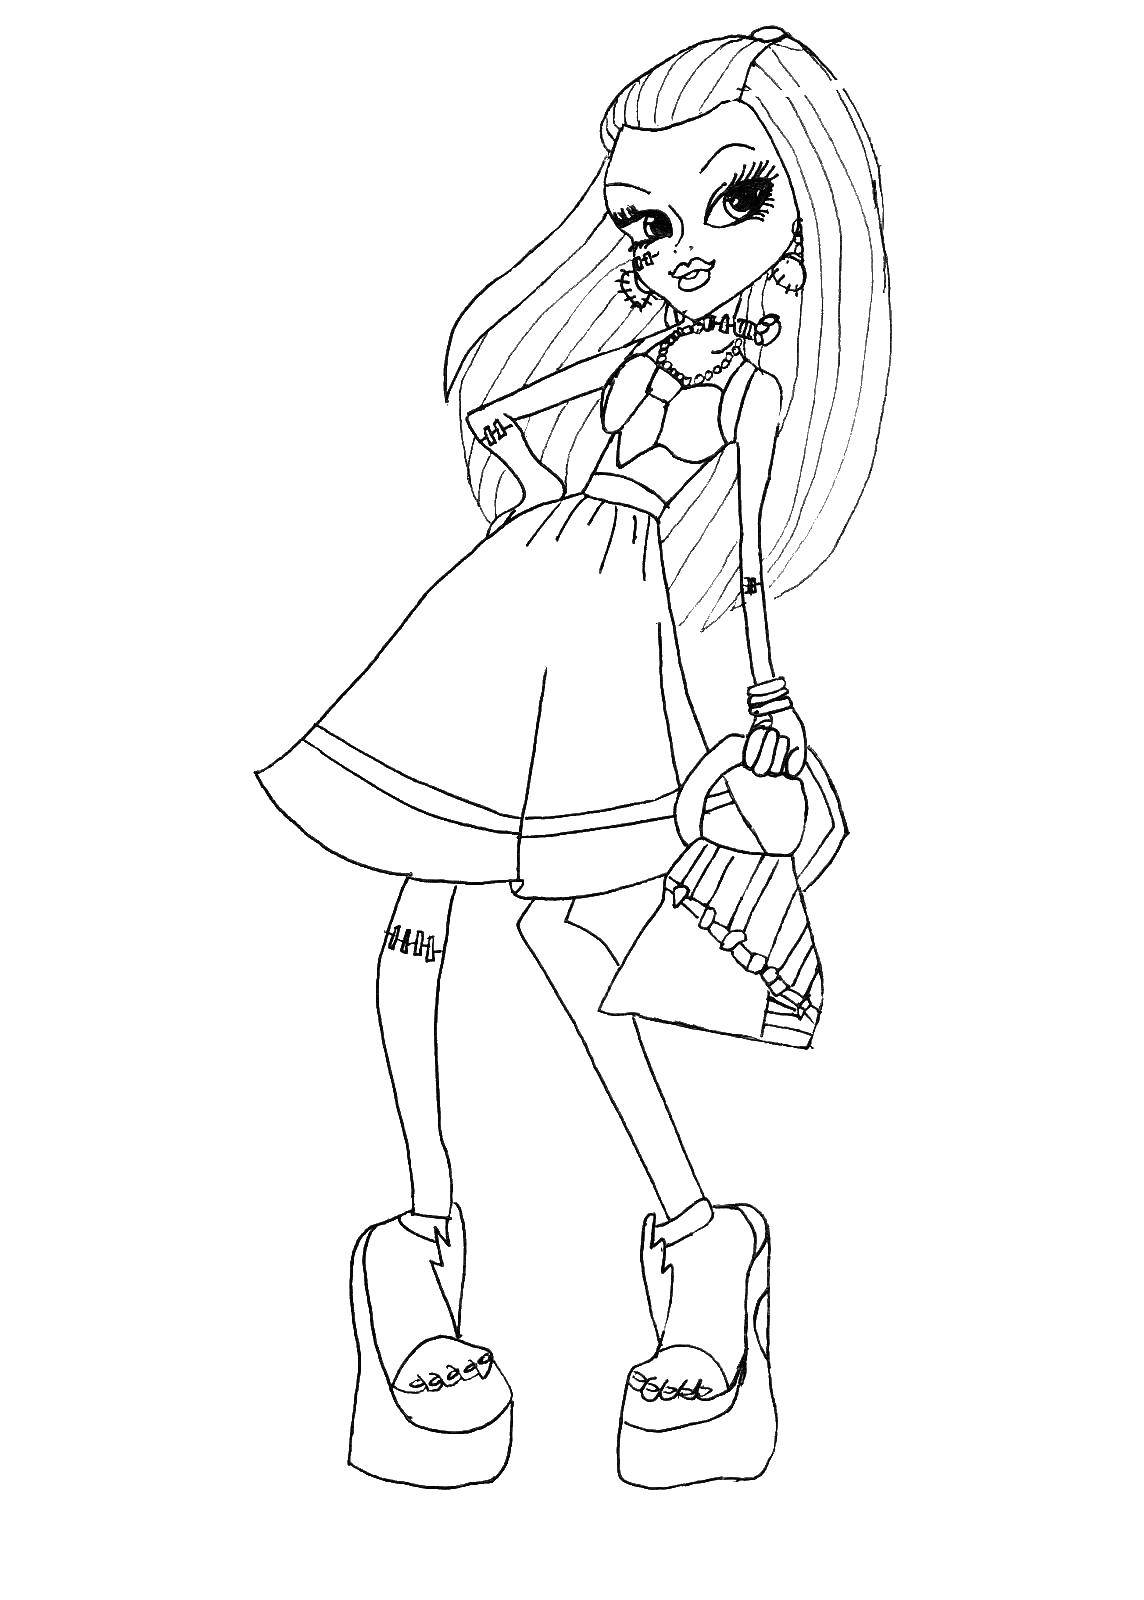 Coloring Stylish monster. Category monster high. Tags:  Monster High.